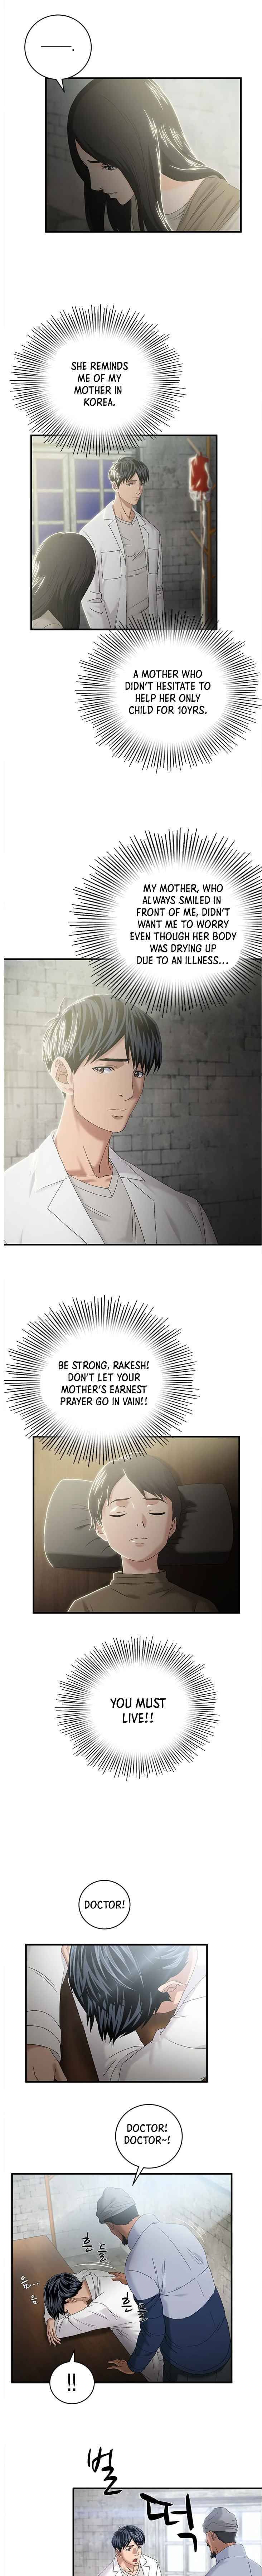 Dr. Choi Tae-Soo Chapter 63 page 6